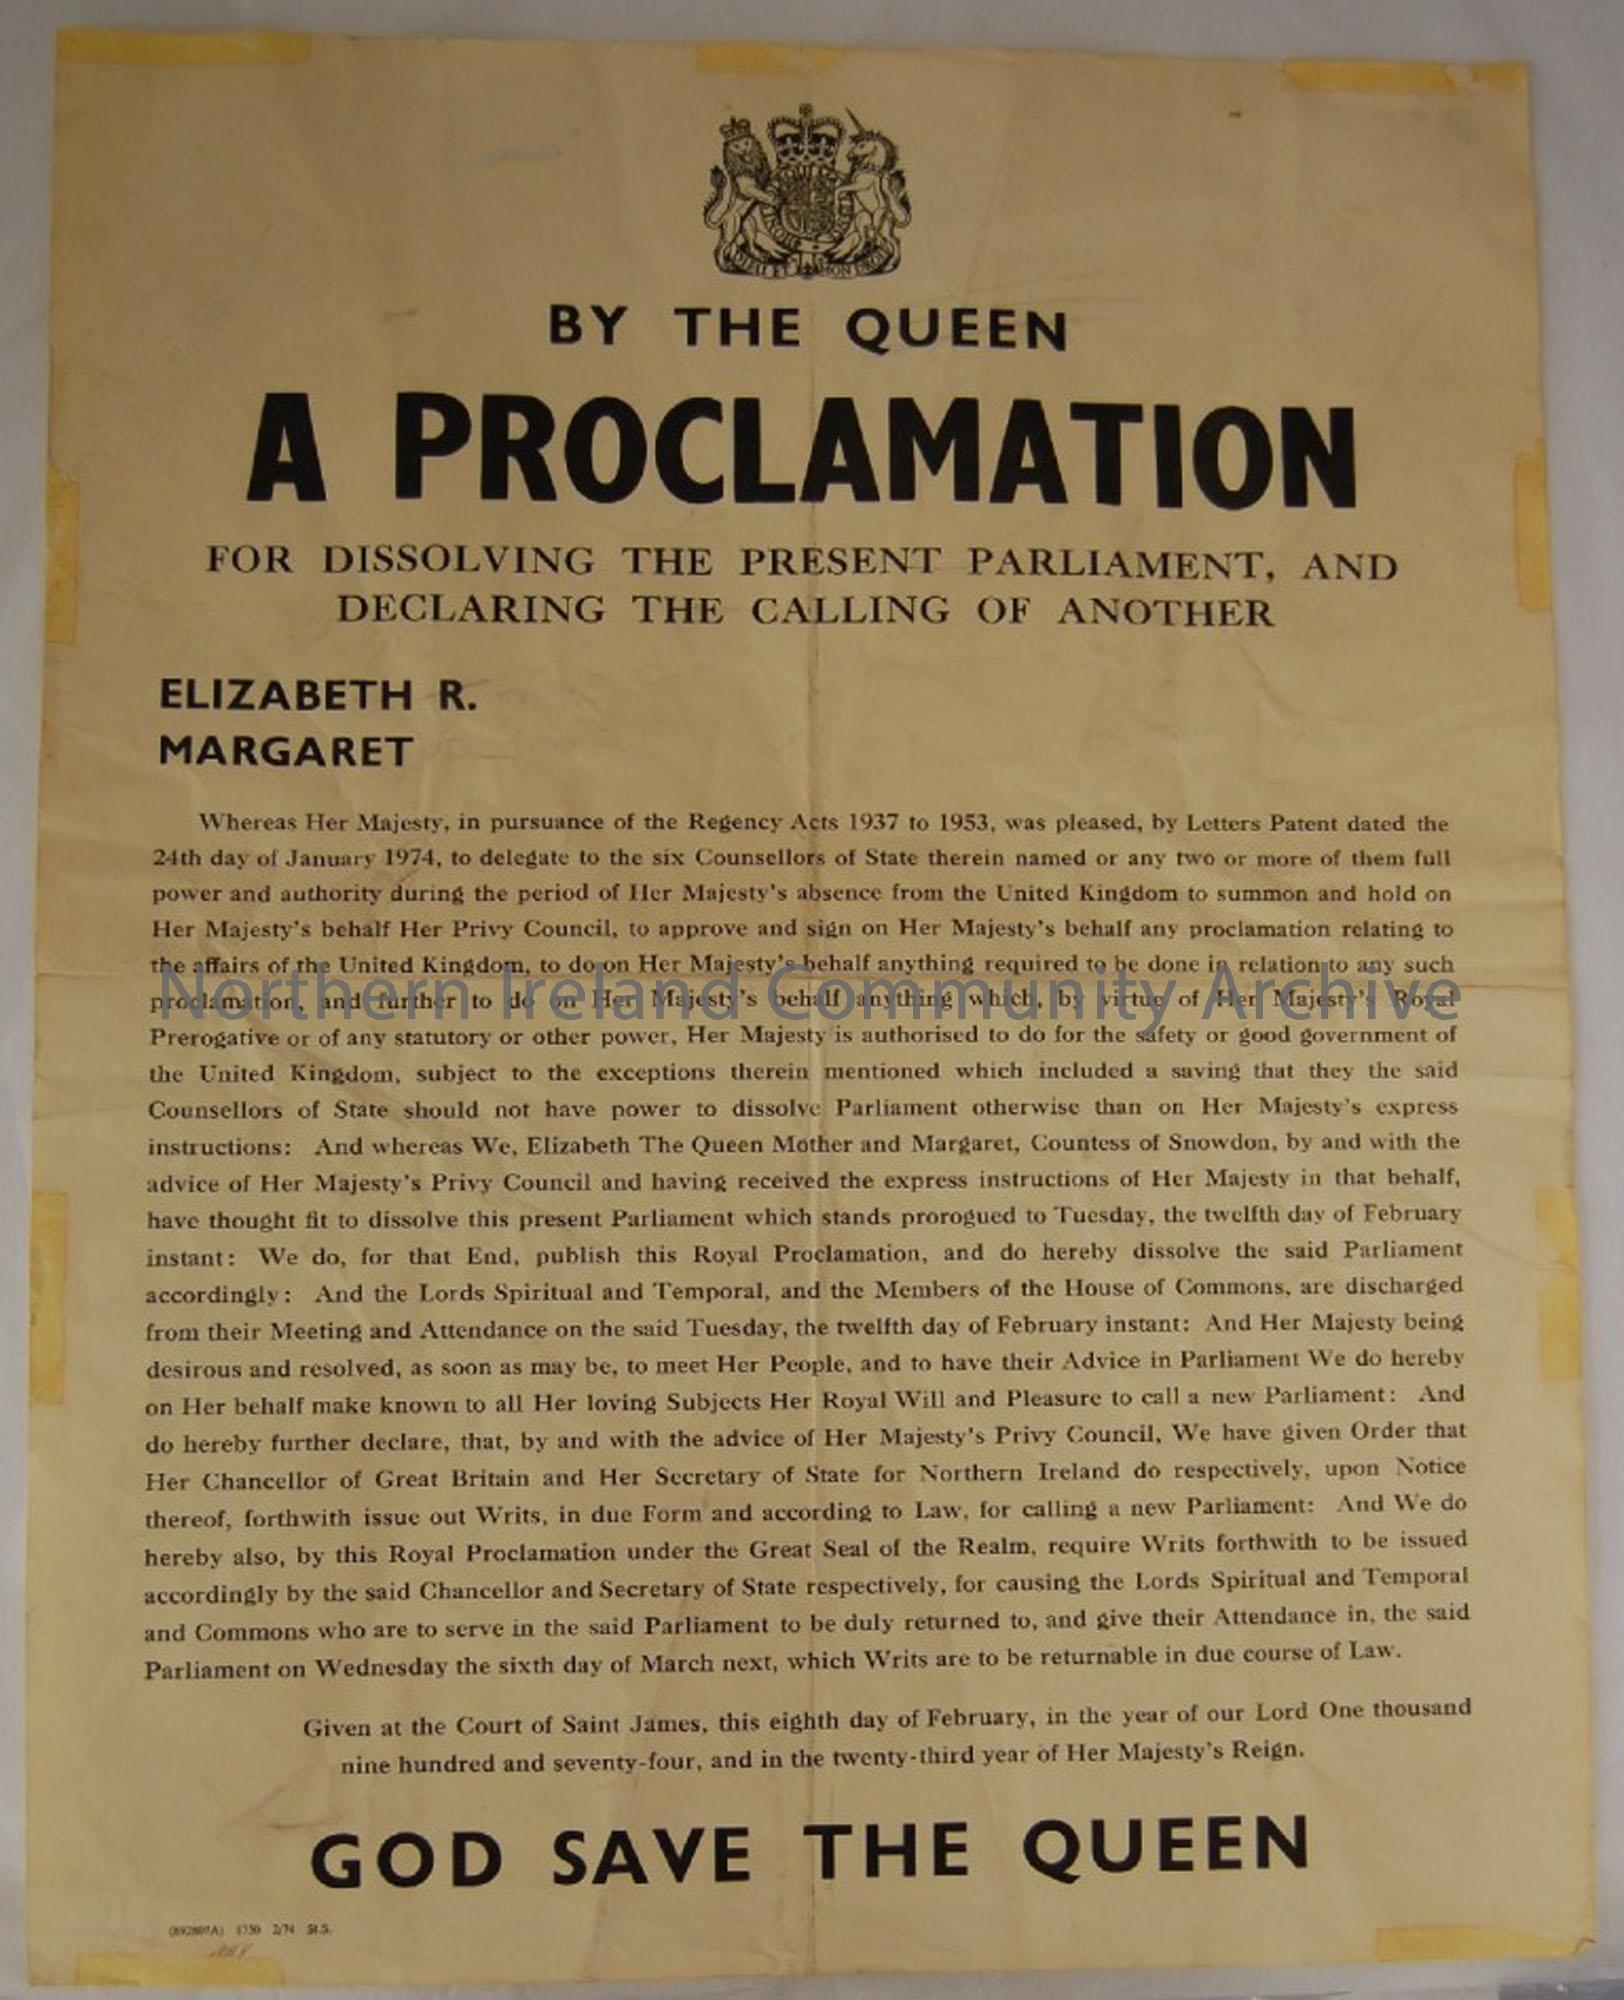 Proclamation for dissolving Parliament. Dissolution of Parliament by the Queen, 8 February 1974